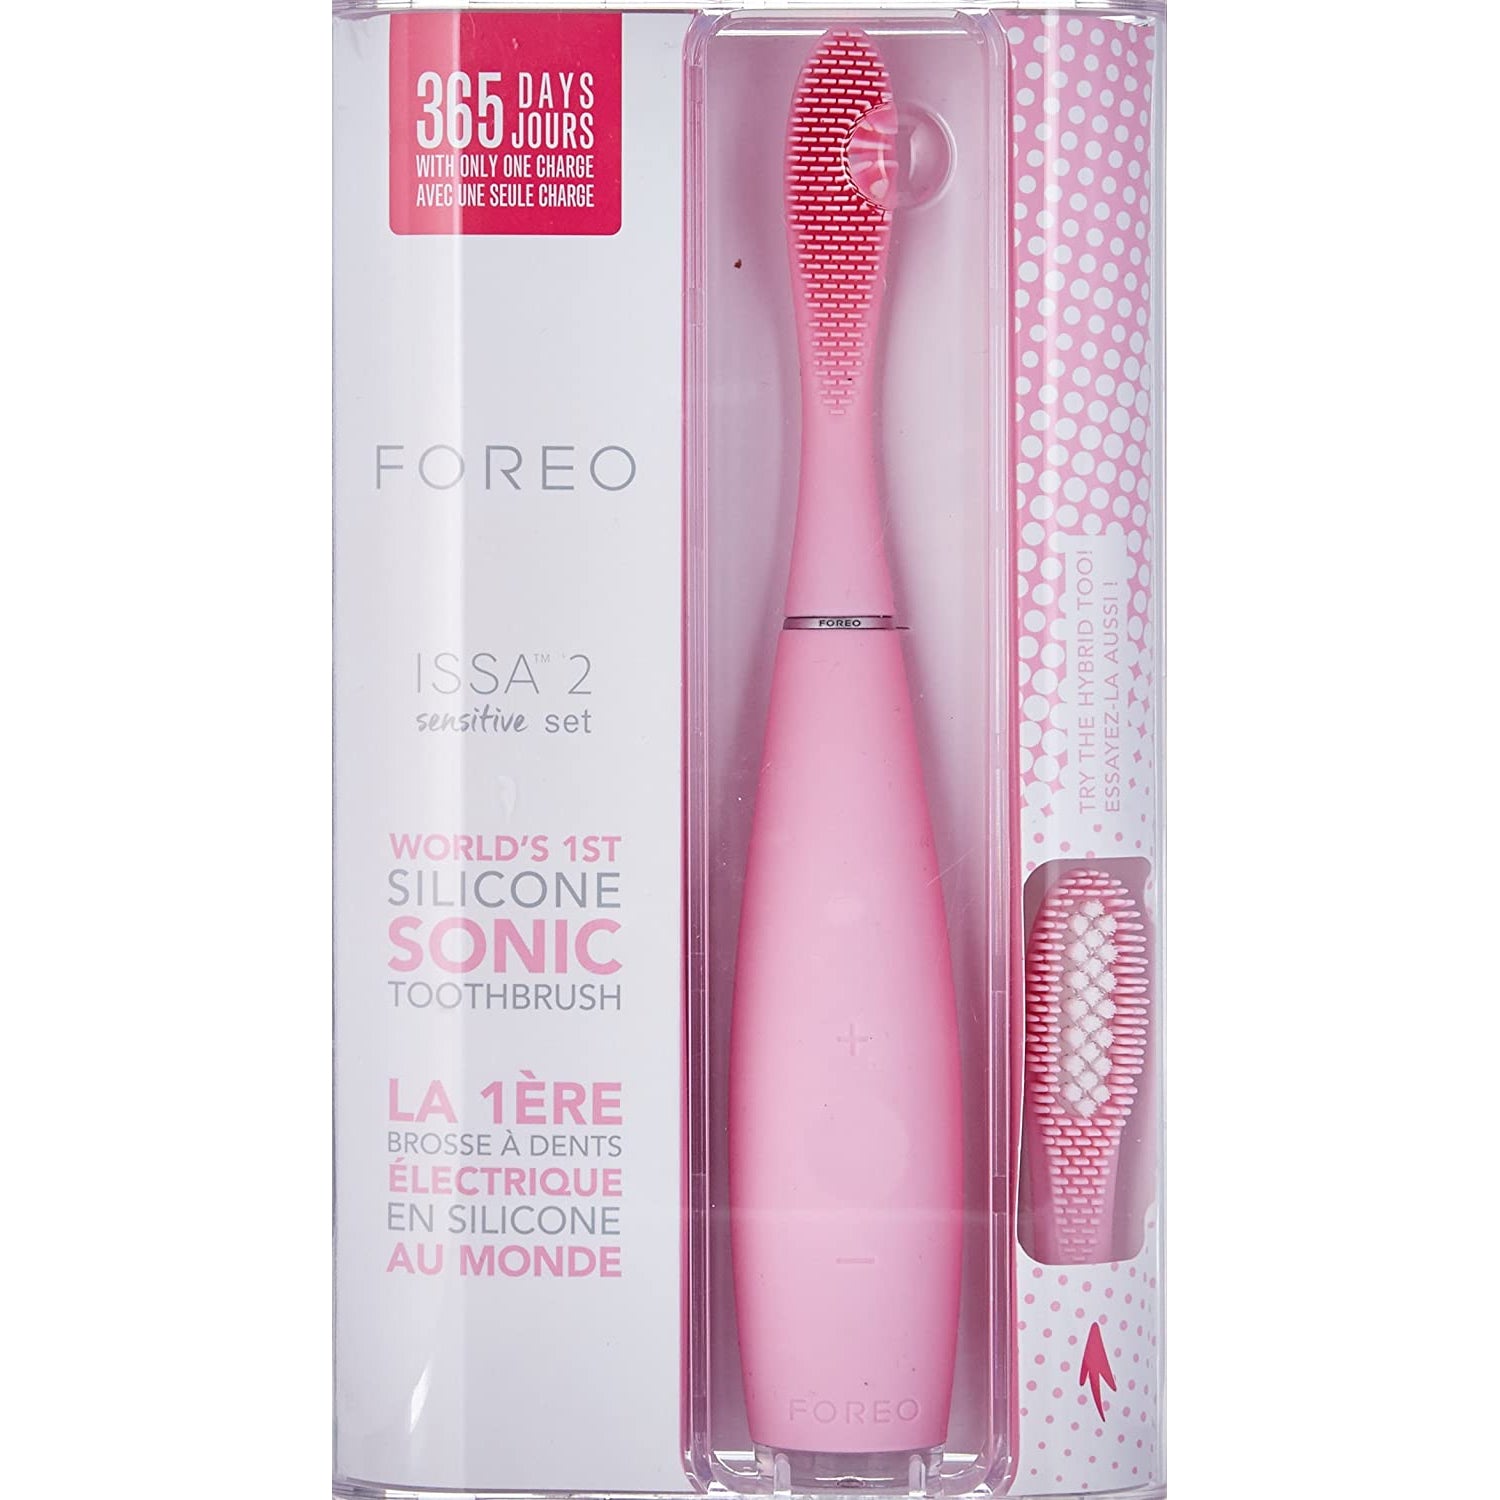 Foreo ISSA 2 Smart Sonic Electric Toothbrush